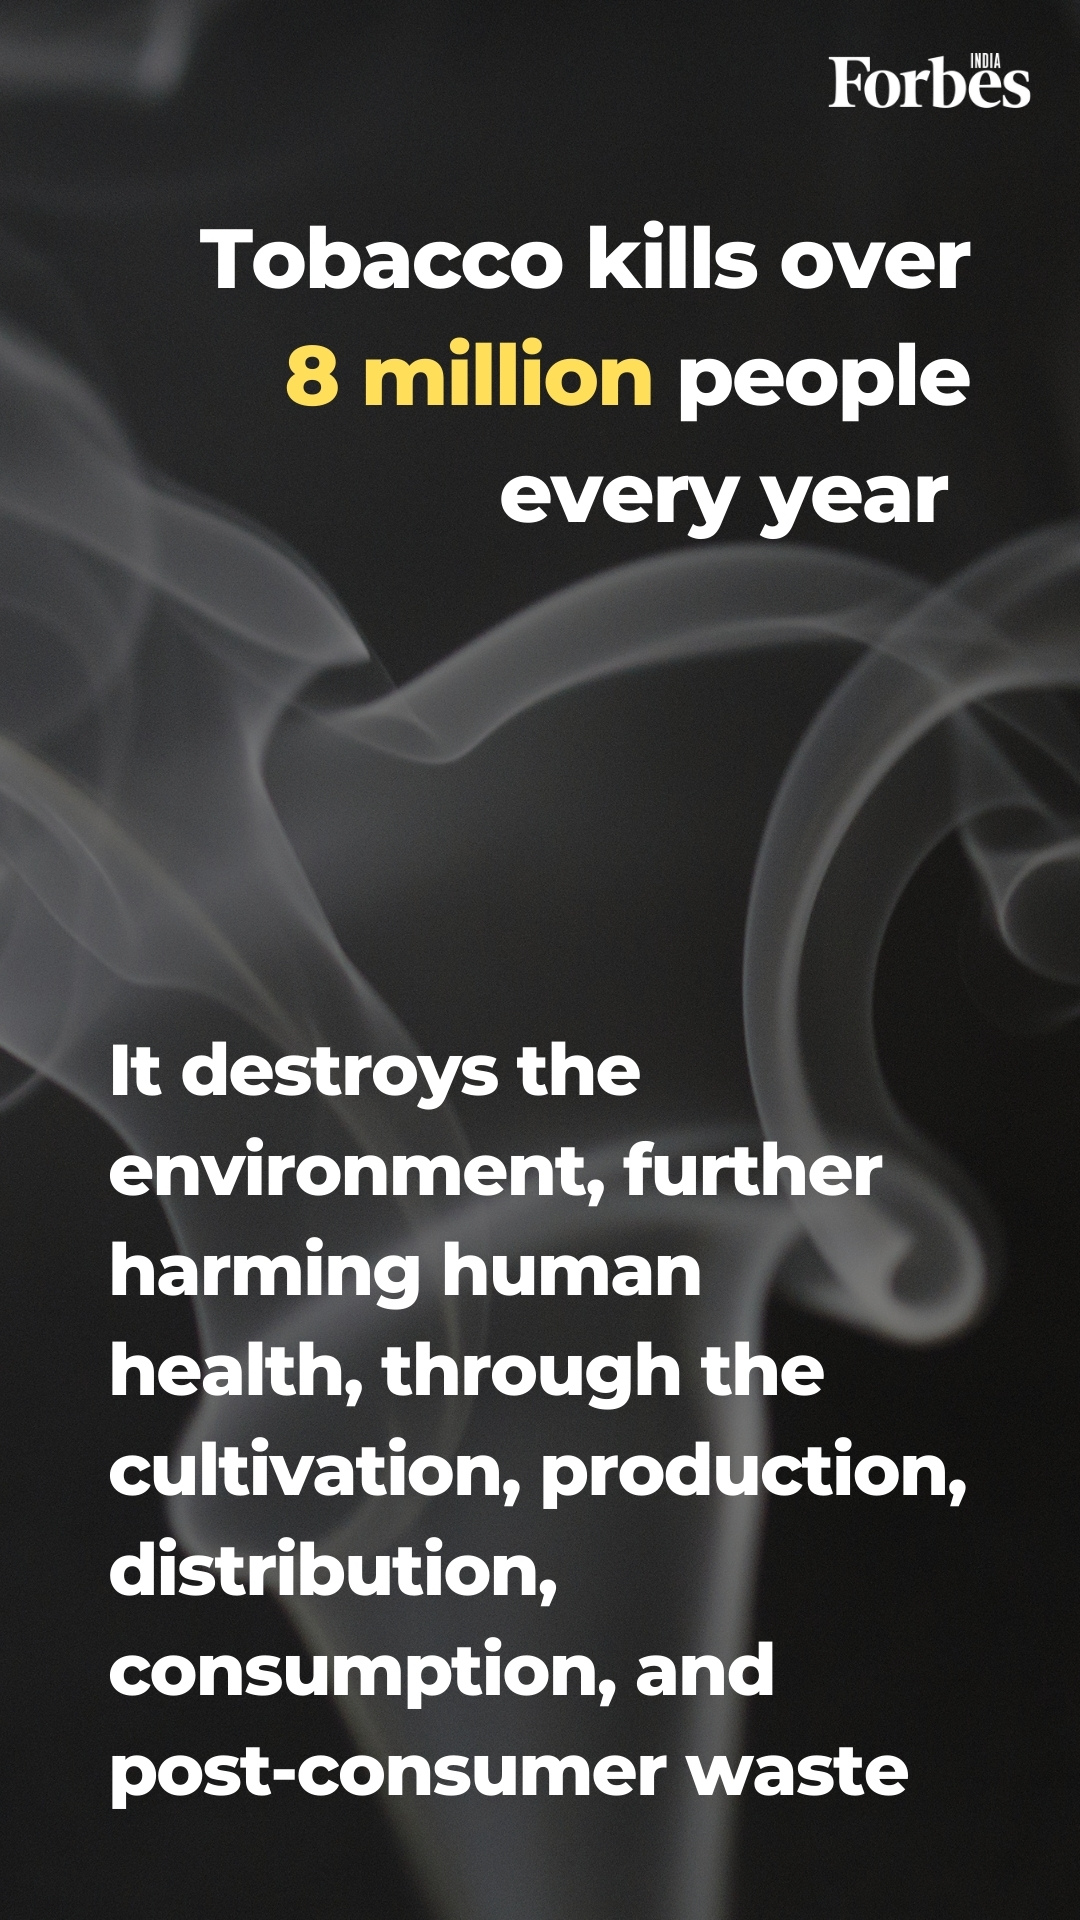 World No Tobacco Day: Tobacco kills over 8 million people every year